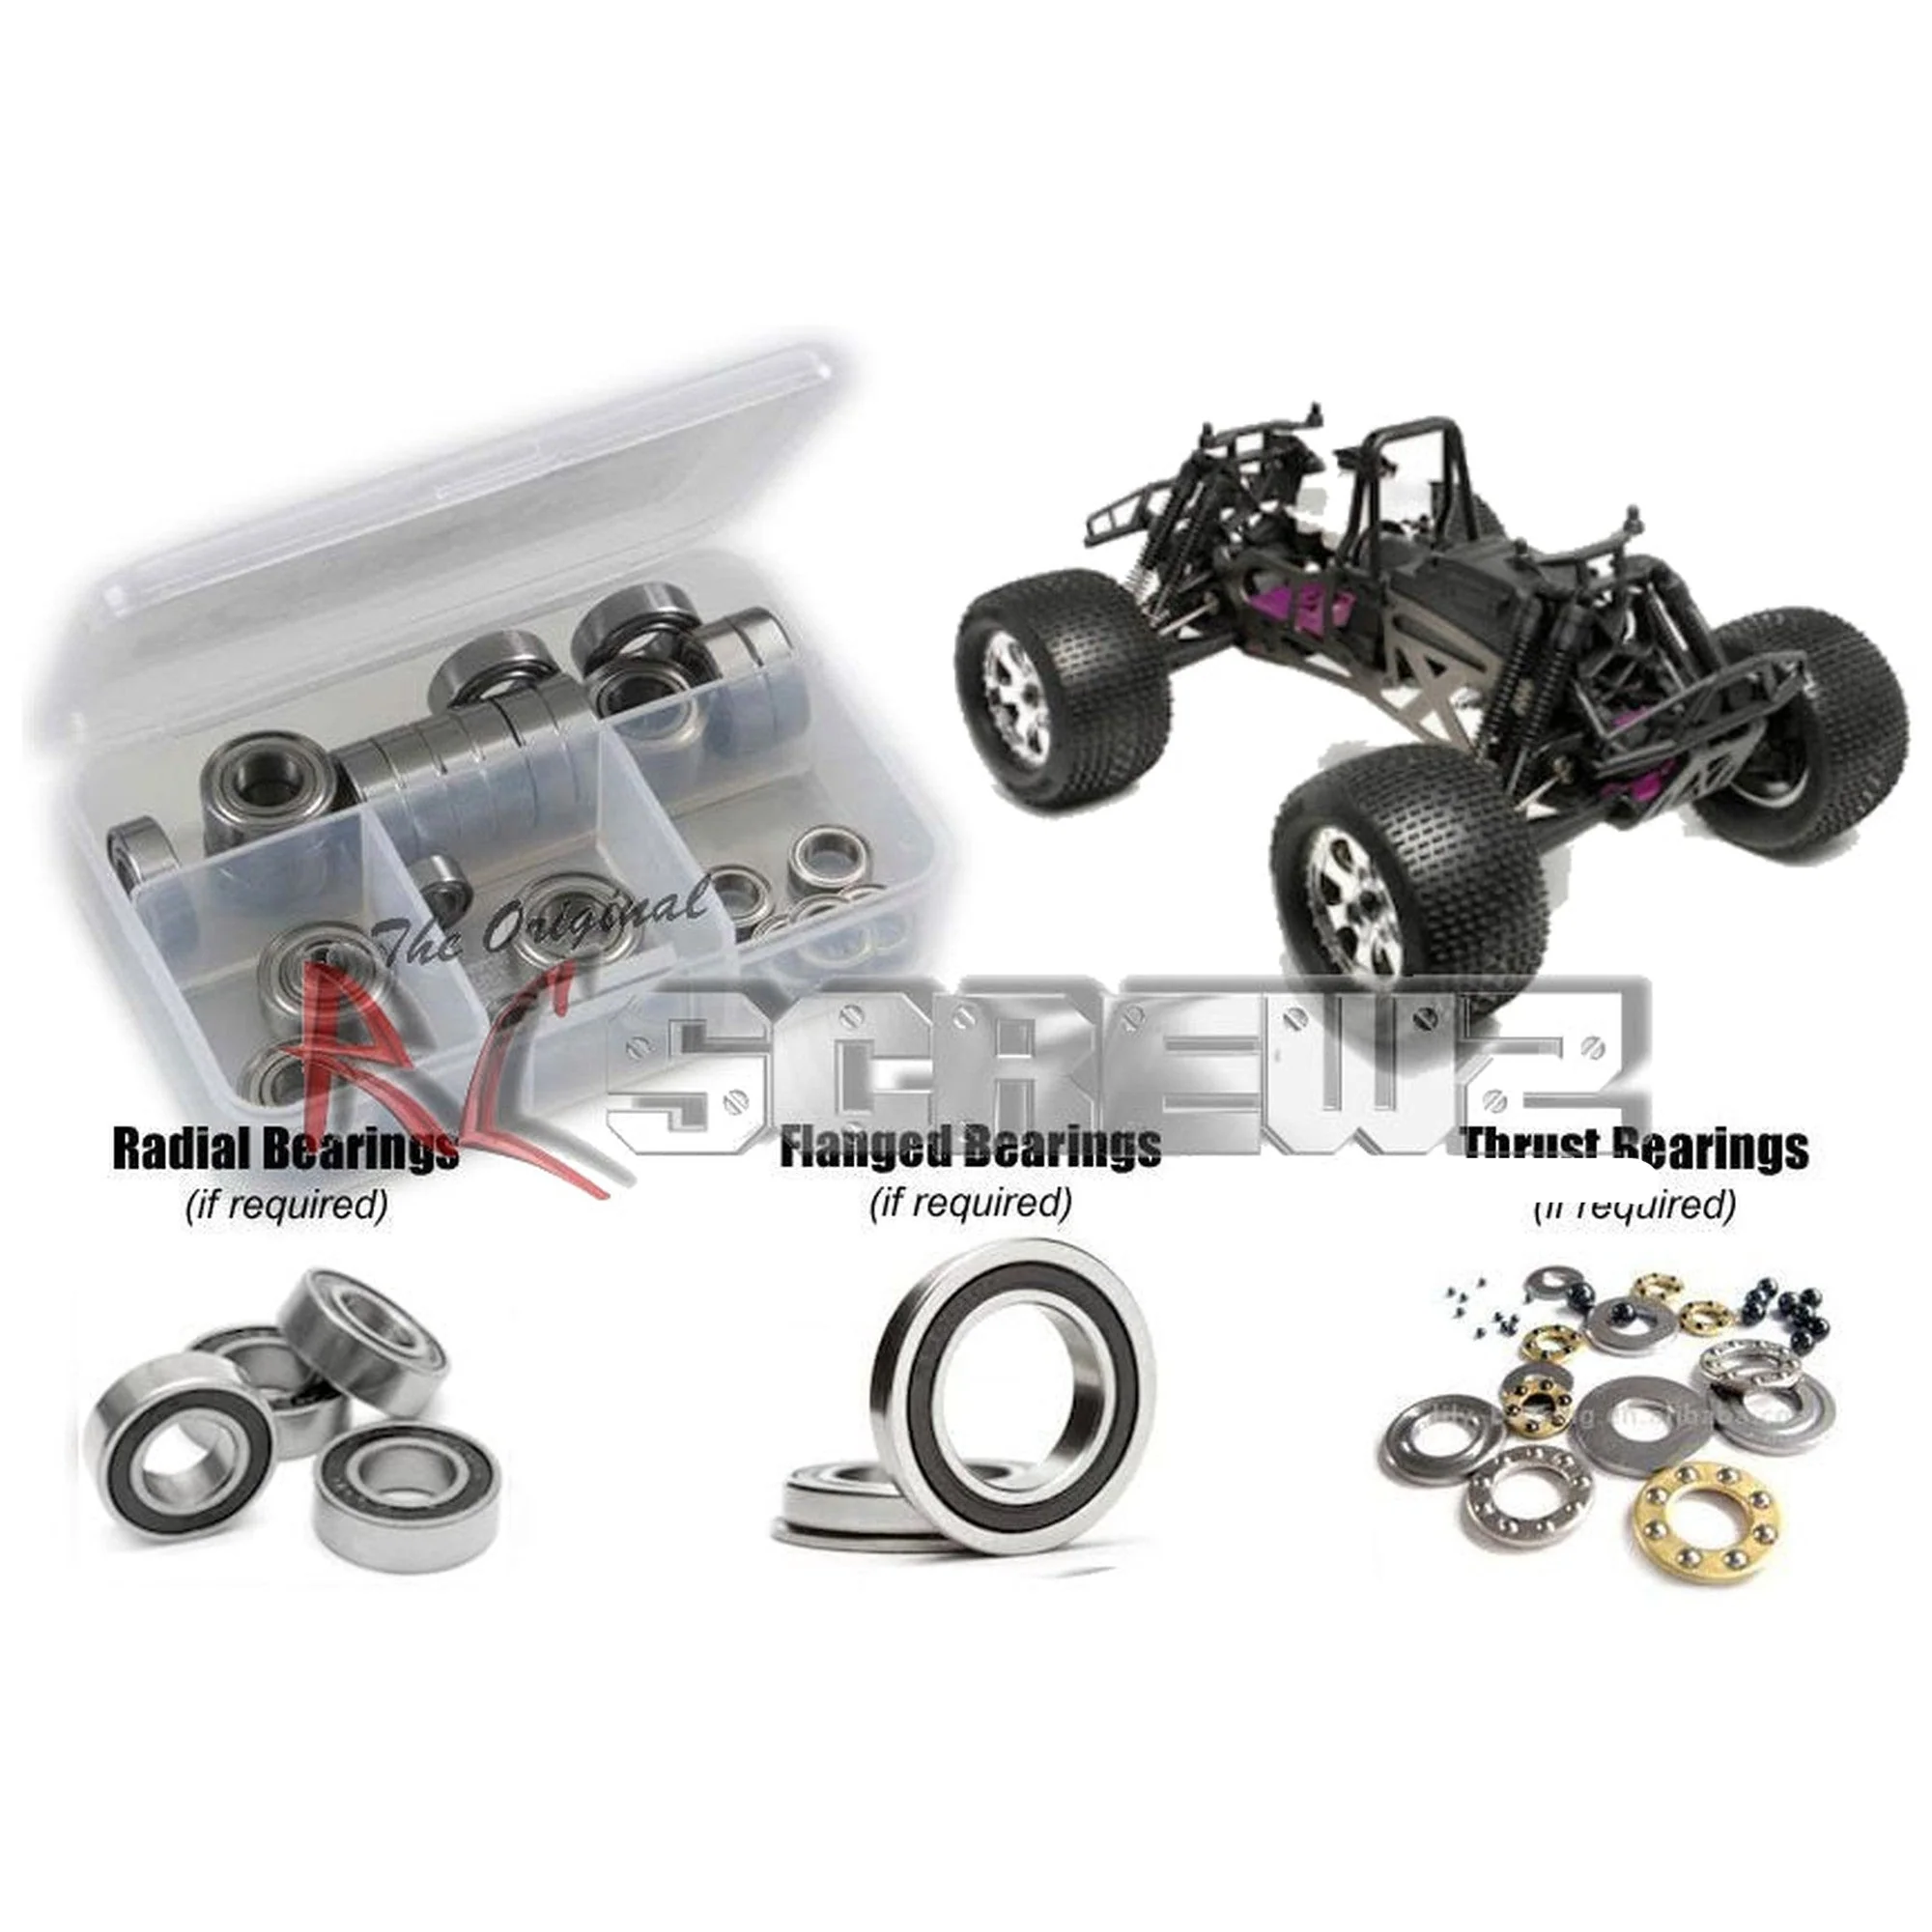 RCScrewZ Rubber Shielded Bearing Kit hpi032r for HPI Racing Savage X 4.1 #858 - Picture 1 of 12